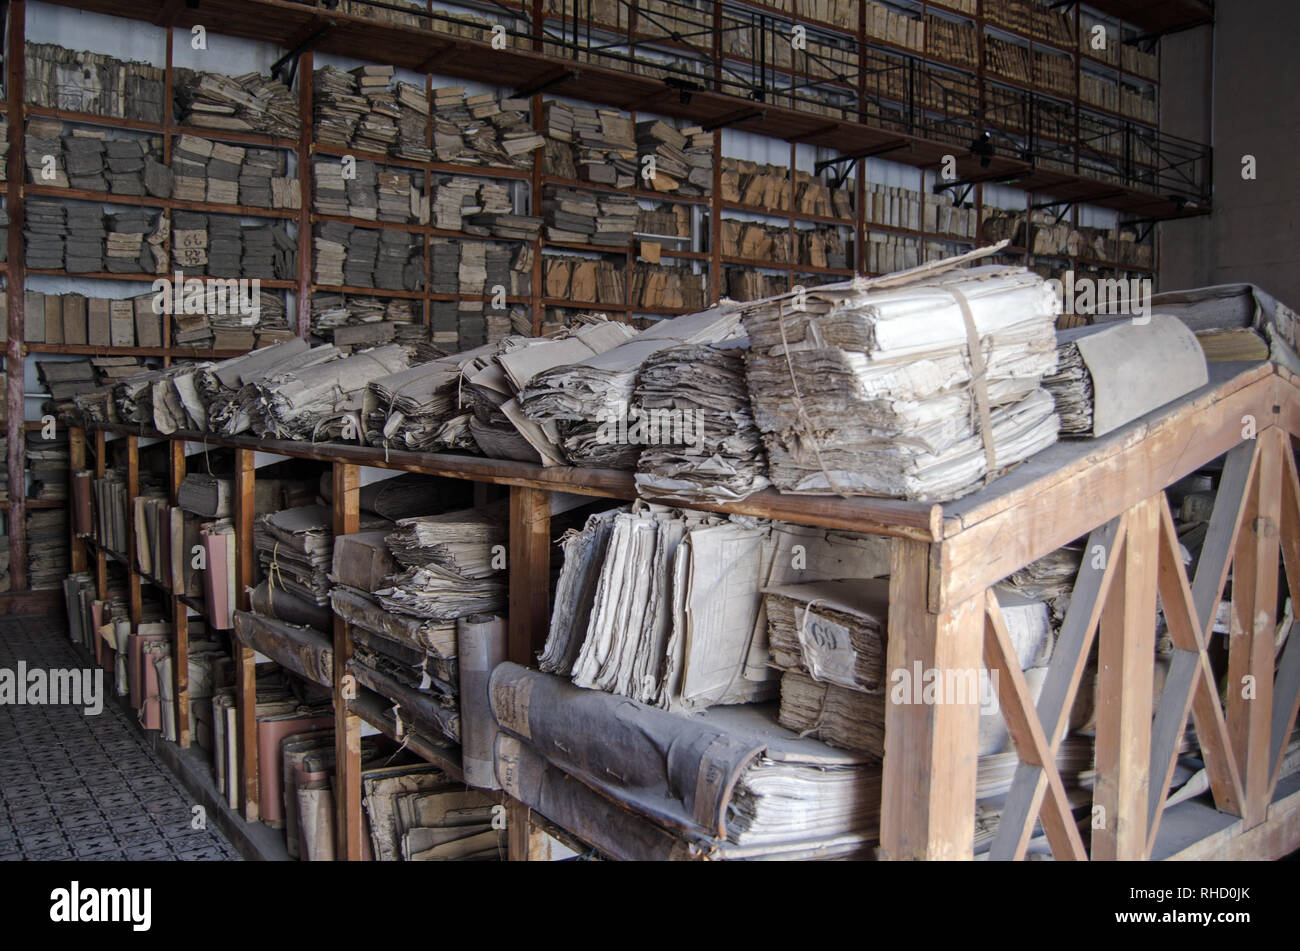 PALERMO, ITALY - JUNE 16, 2018:  Bundles of old papers and files stacked on shelves belonging to the State Archives of Palermo, Sicily.  Papers dating Stock Photo